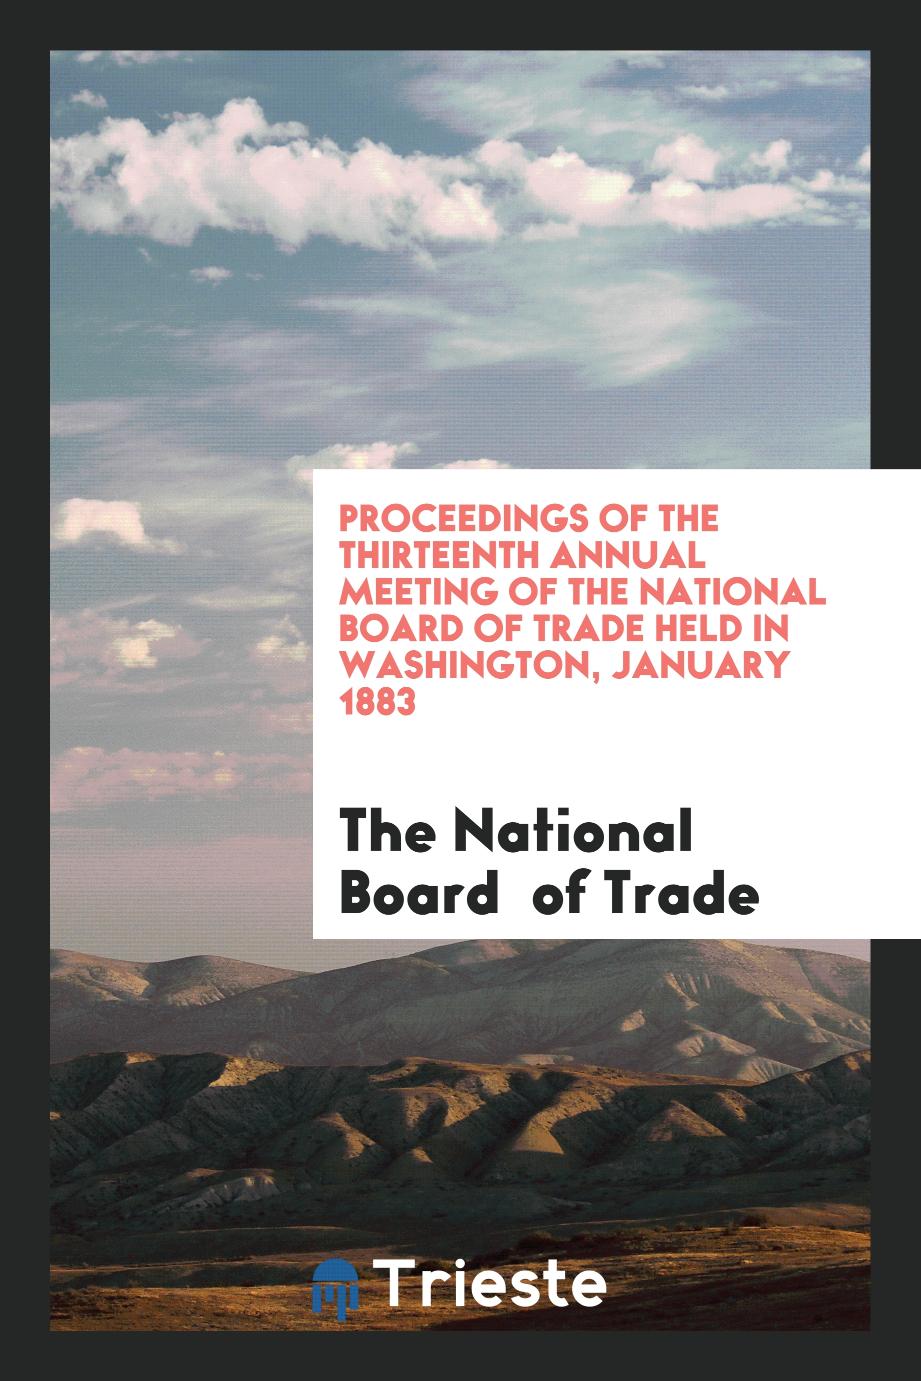 Proceedings of the Thirteenth Annual Meeting of the National Board of Trade Held in Washington, January 1883